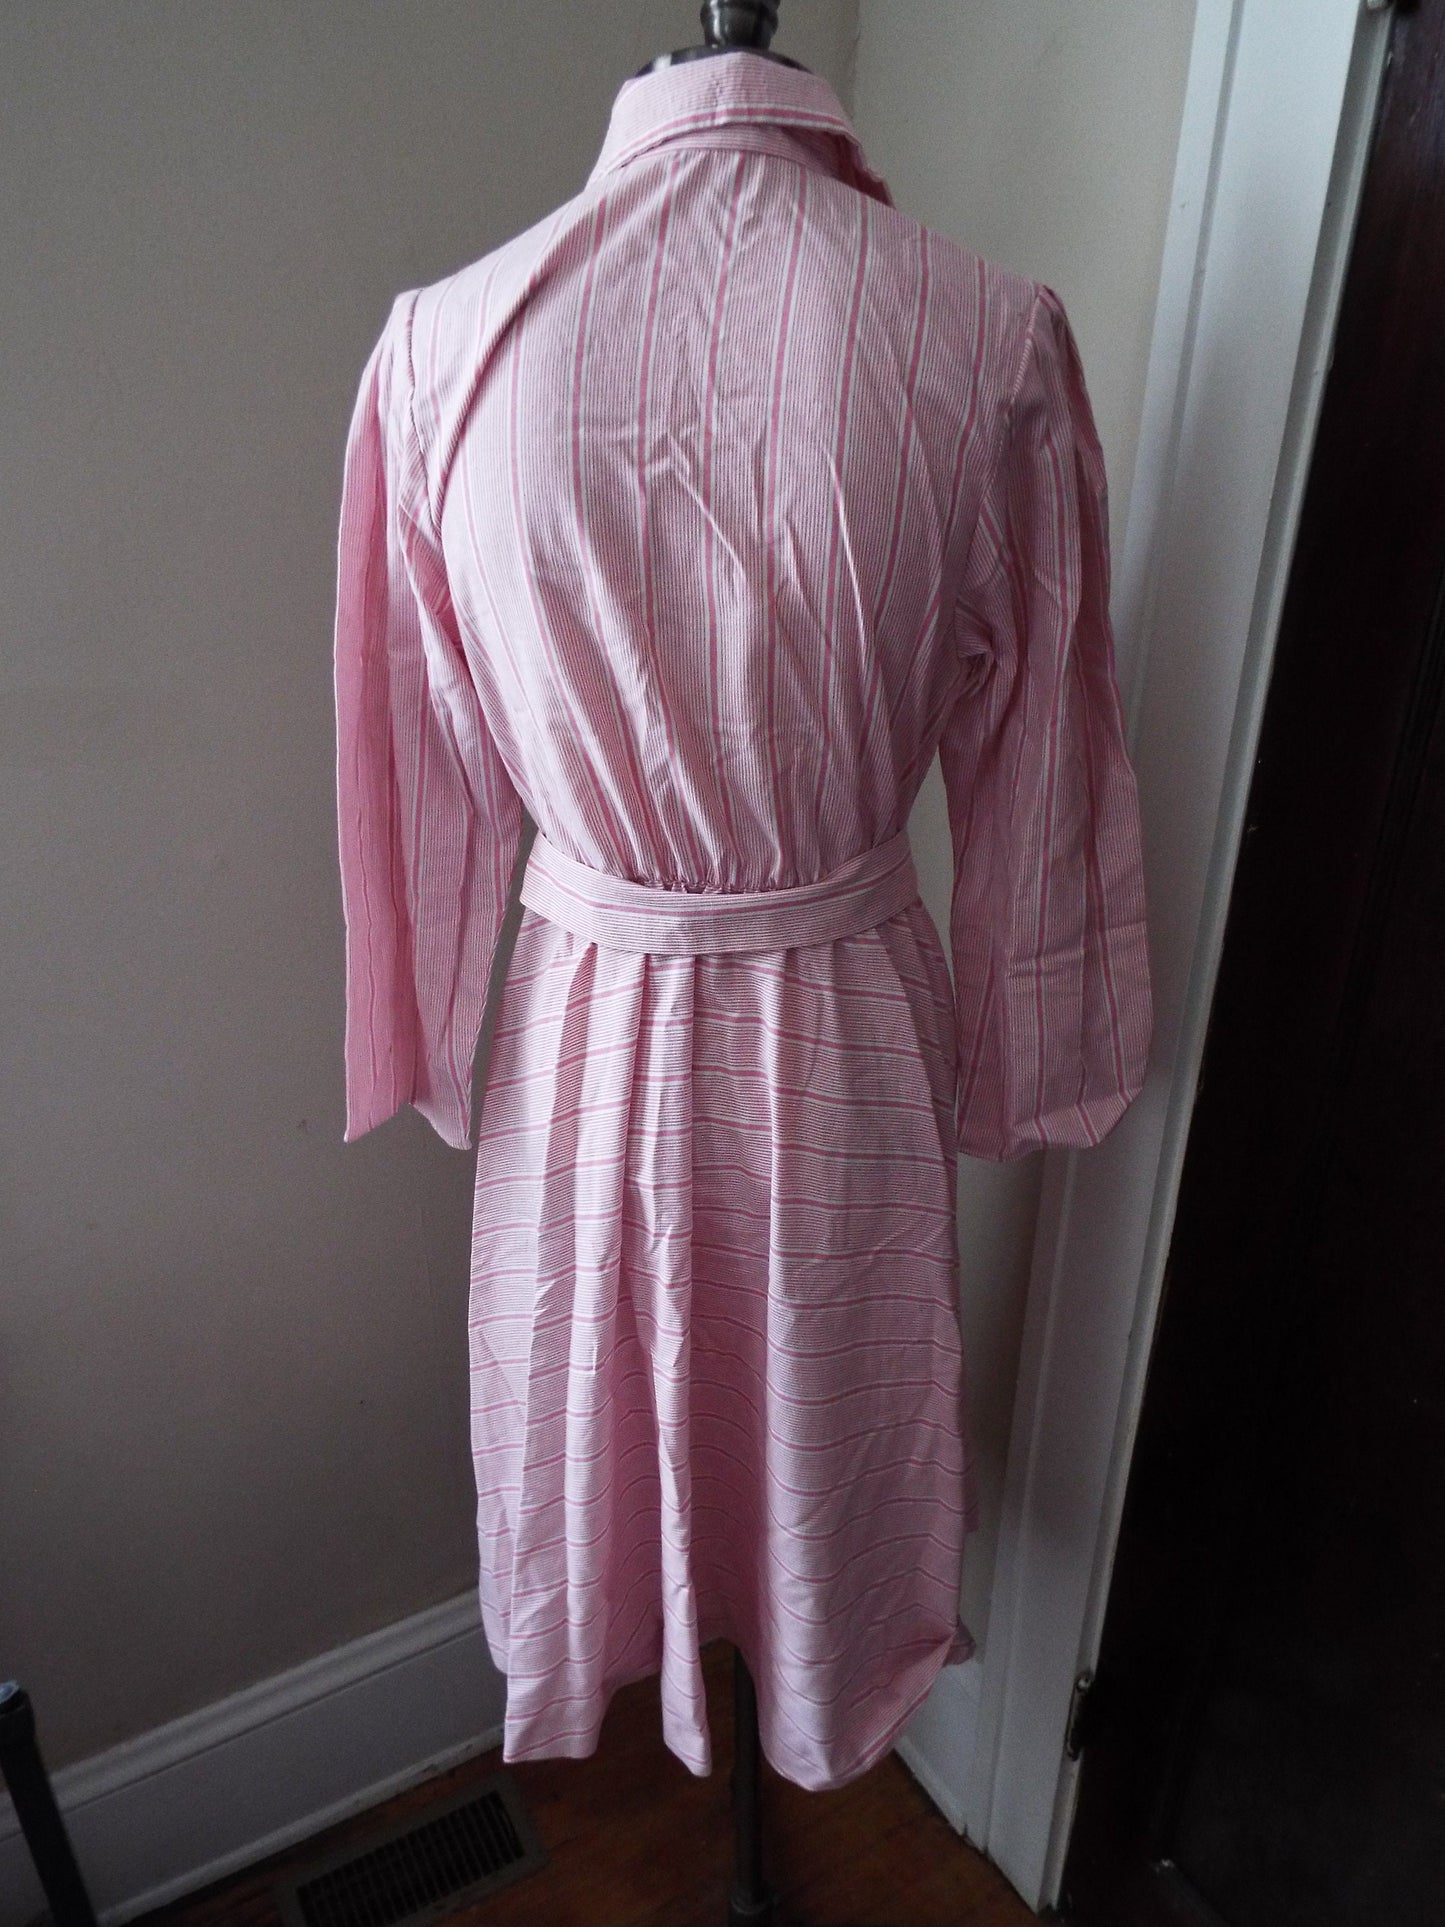 Vintage Long Sleeve Striped Dress by Sunshine Alley